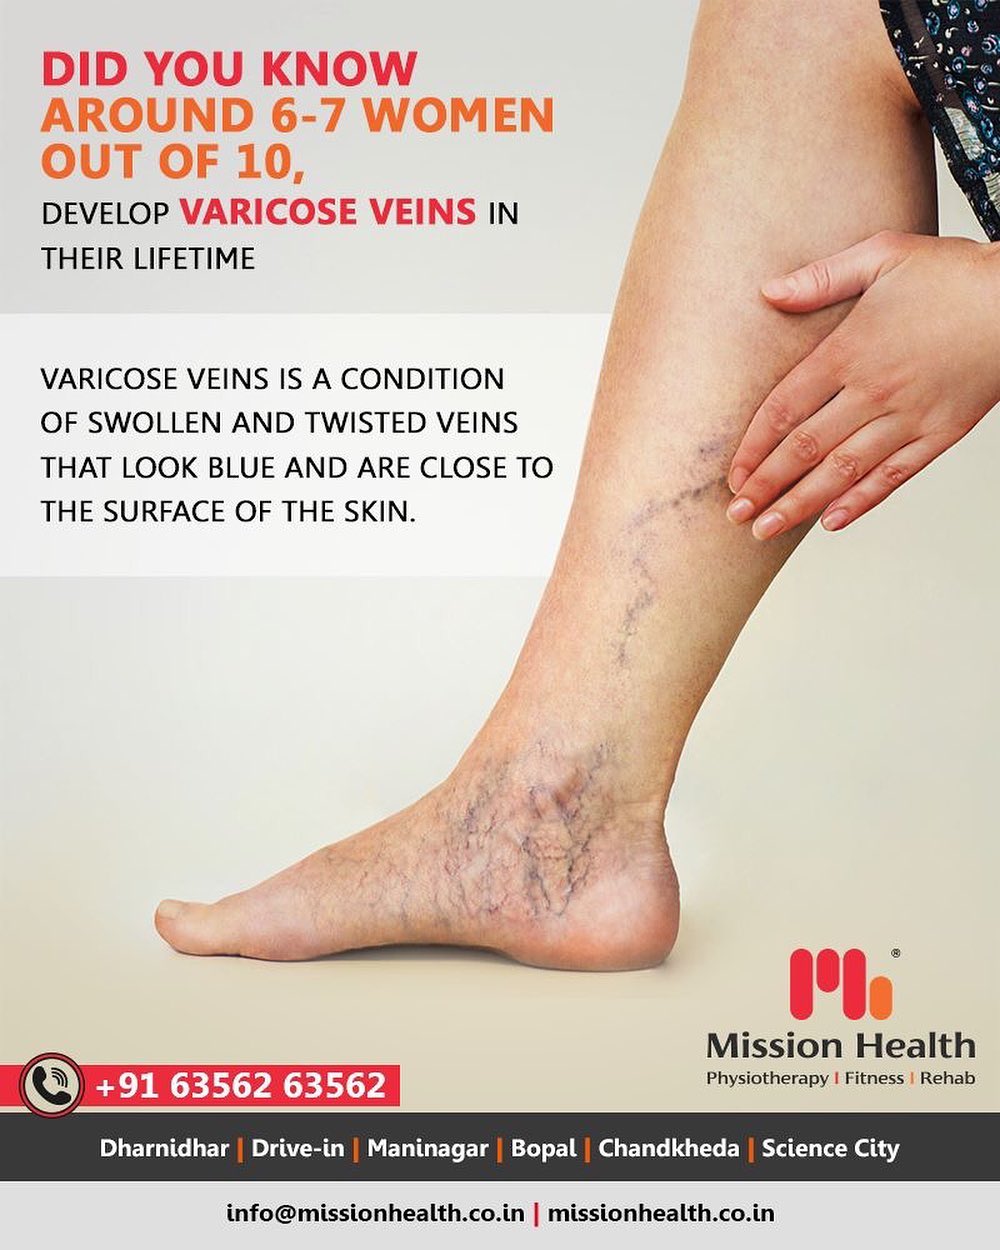 Mission Health offers a painless and non-surgical approach to treating Varicose Veins with -> Non-Surgical Pain & Circulation enhancing Technologies – A revolution in non-surgical management of Varicose Veins -> Varicose Veins Exercise Protocol -> Prevention Strategies & Lifestyle Modifications. 
This holistic Physiotherapy Programme has shown remarkable results in 90% cases of Varicose Veins, to the extent of healing the painful Venous Ulcers without medicines and surgery!

Call +916356263562
www.missionhealth.co.in

#varicoseveins #spiderveins #veintreatment #veins #spiderveintreatment #veinremoval #vascularphysiotherapy #varicoseveintreatment #veindoctor #varices #veinclinic #varicose #healthylegs #health #legveins #varicoseveins #MissionHealth #MissionHealthIndia #MovementIsLife